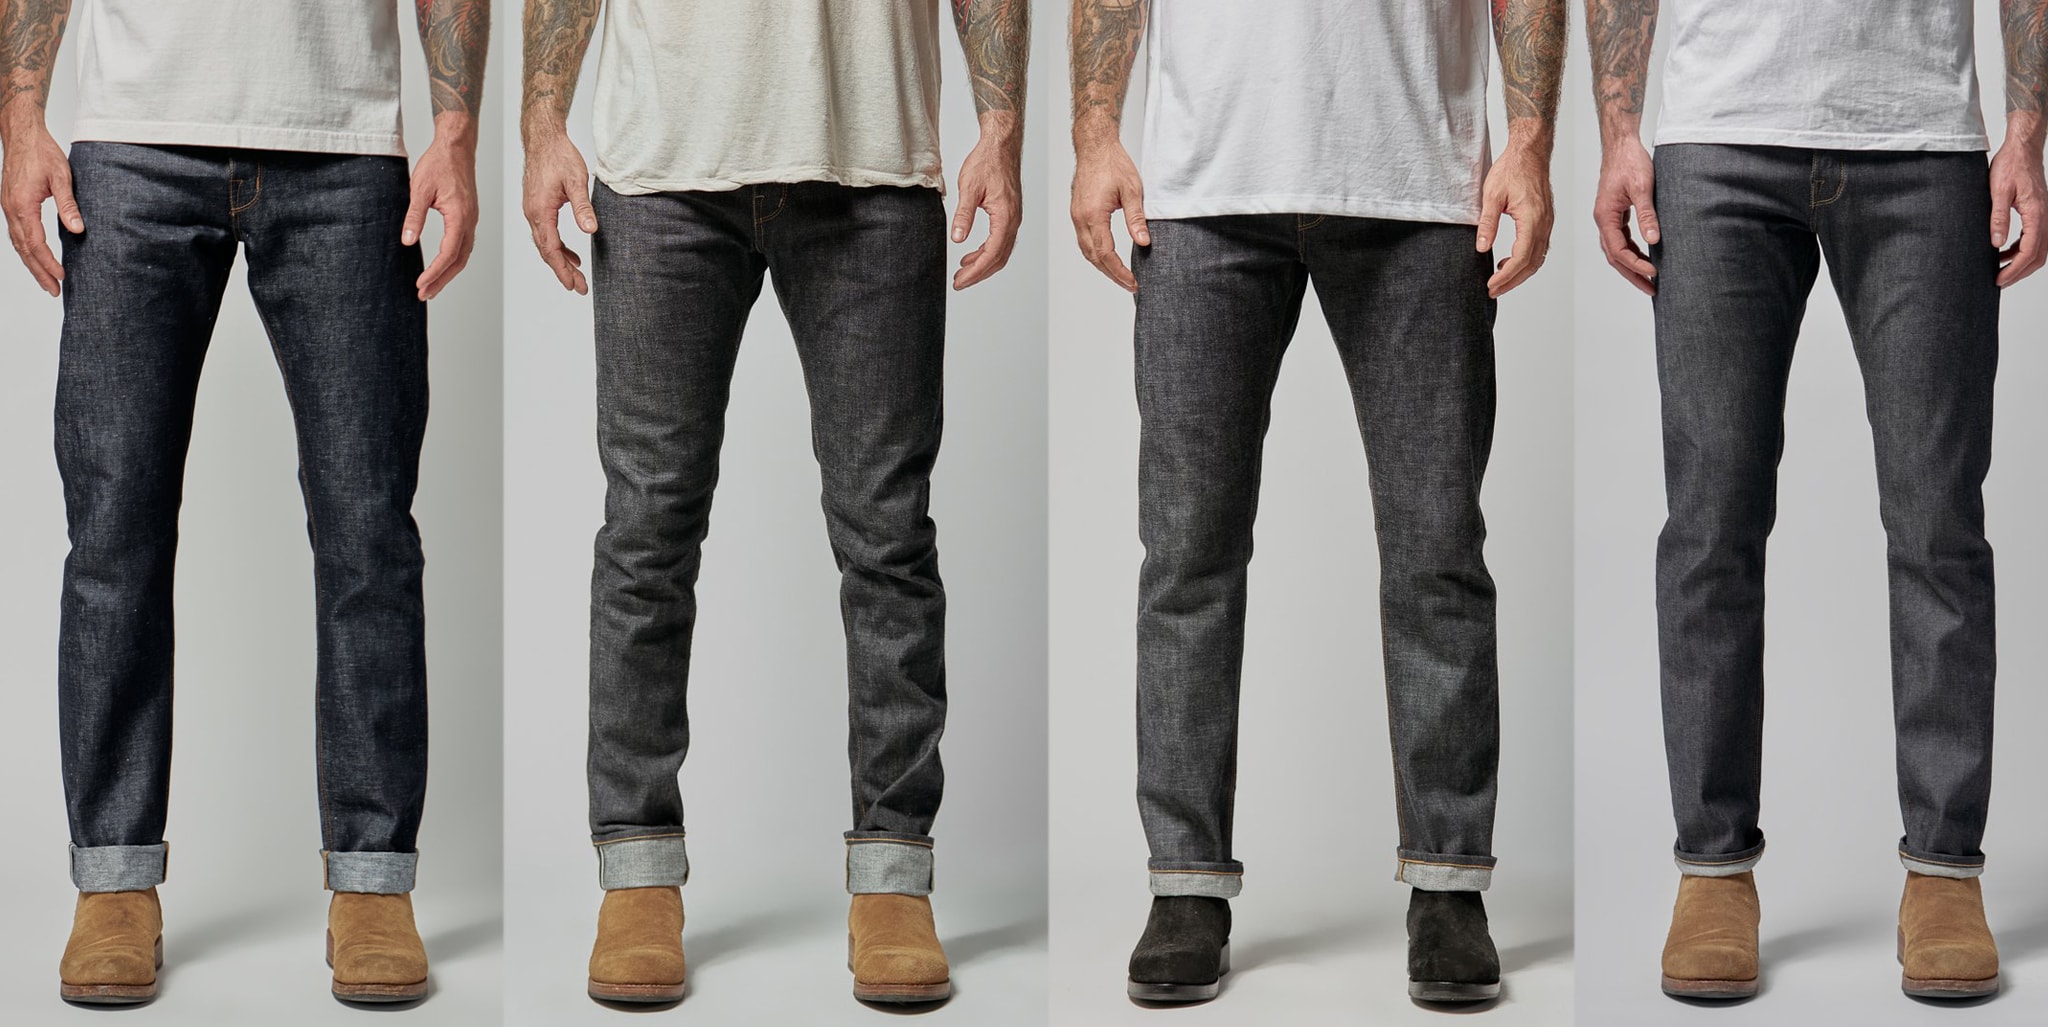 Shockoe Atelier offers men's jeans of different fits and styles like the Standard Linen Selvedge, $215; the Slim Kojima, $250; the Standard Kojima, $250; and the Slim Stretch Selvedge,$225